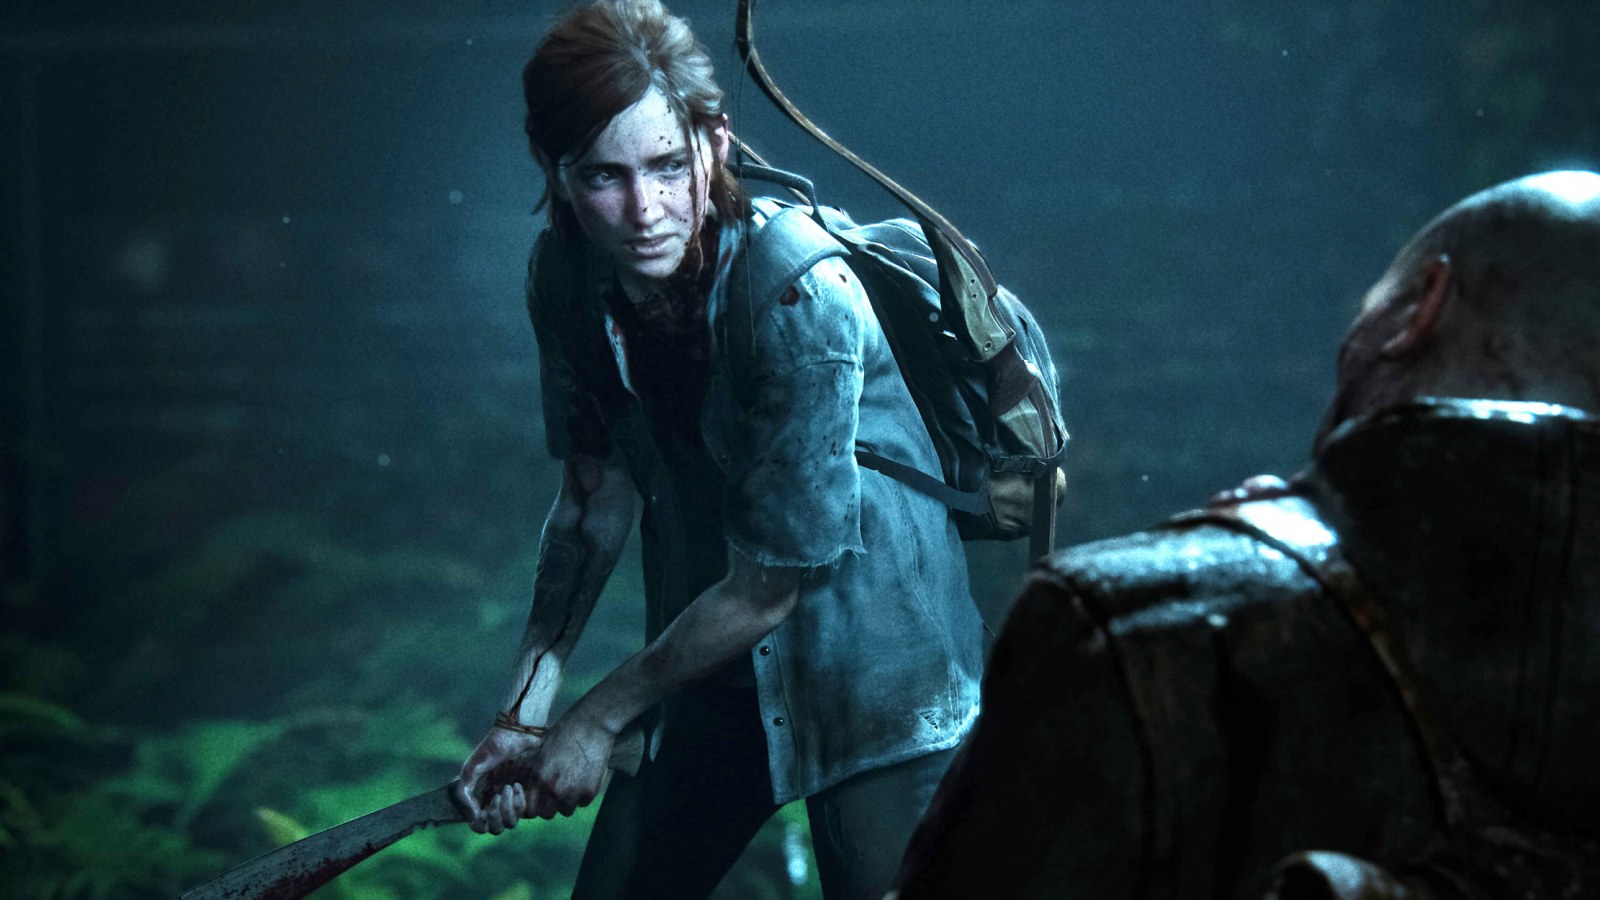 How The Last Of Us Part Ii Gameplay Balances Realism With A High Body Count